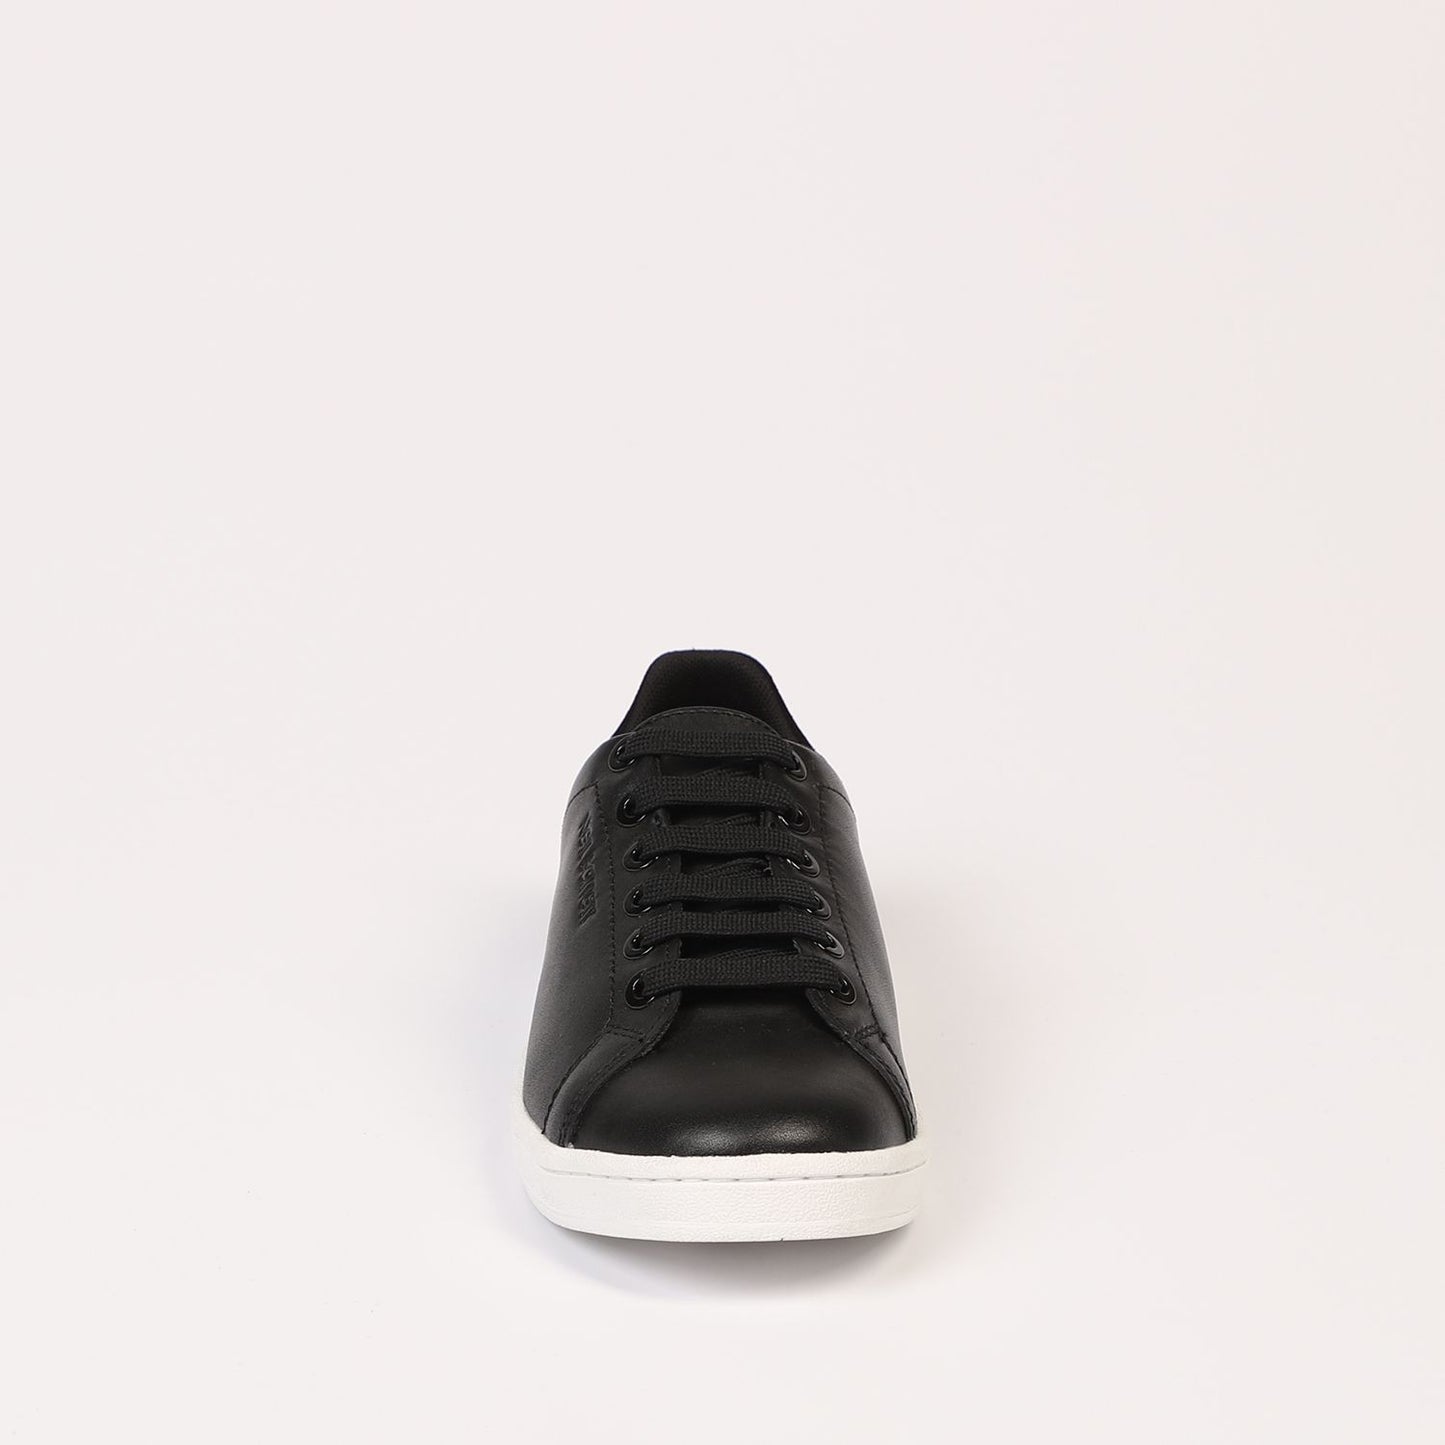 Chic Black Tennis Trainers with Lace Closure